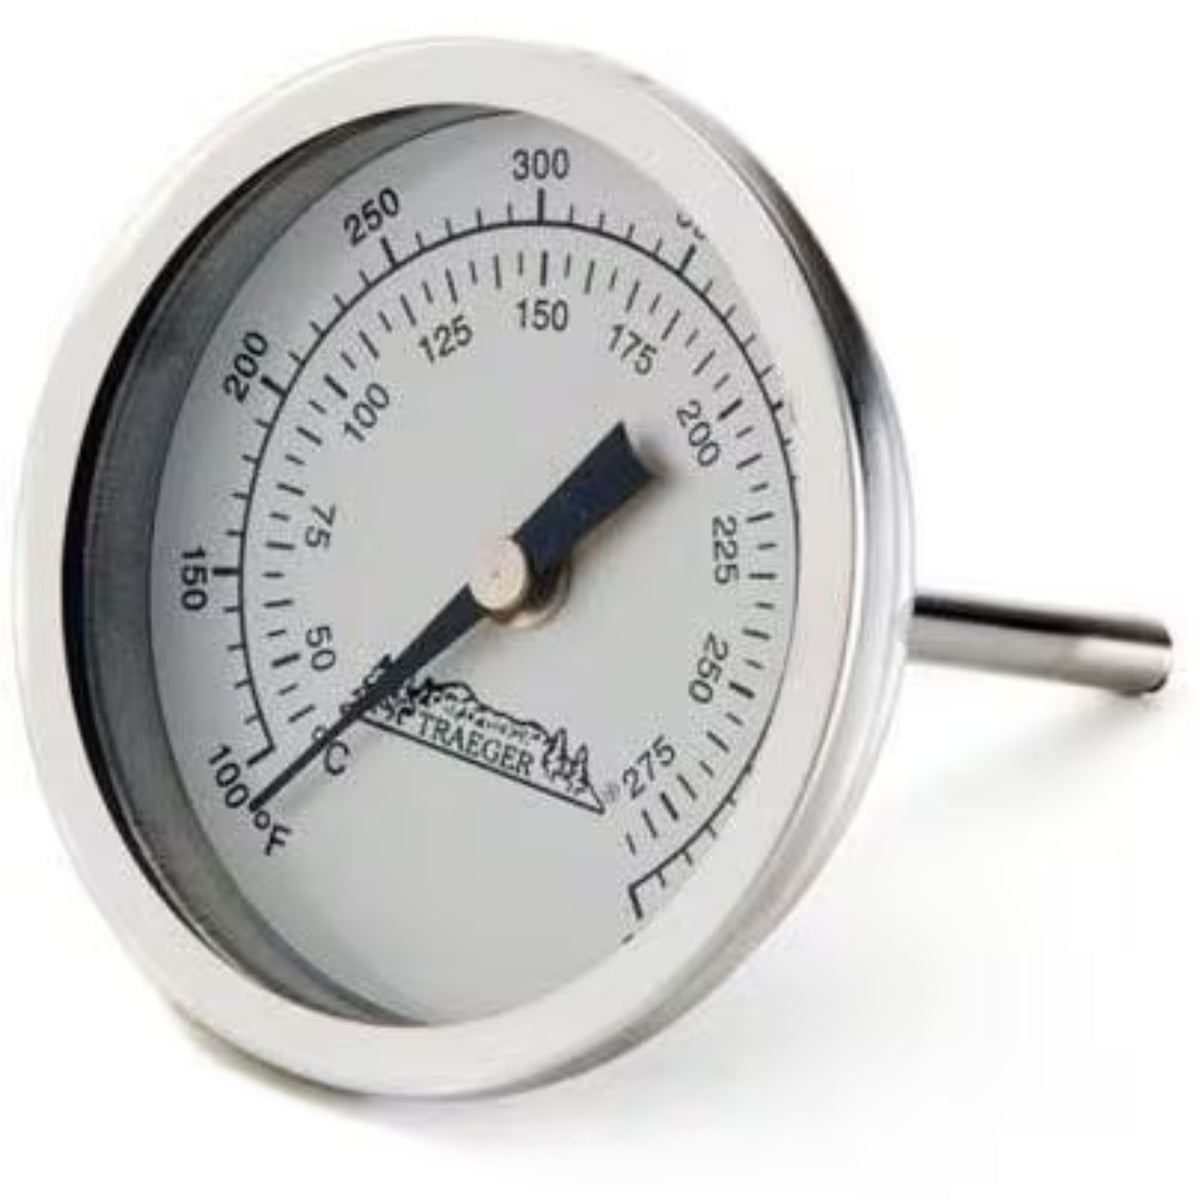 Traeger Dome Thermometer 2"